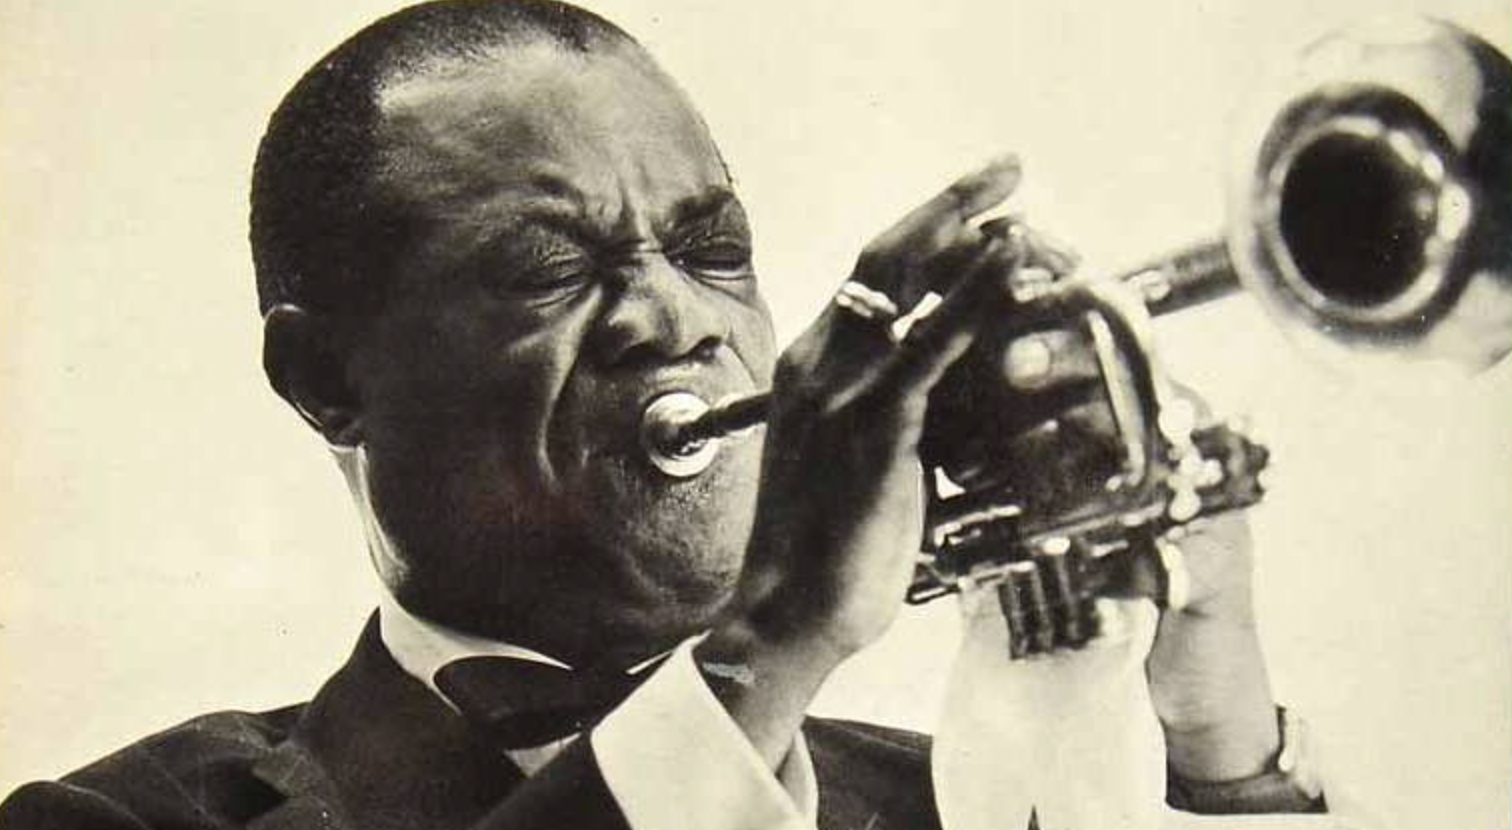 Louis Armstrong Official Store